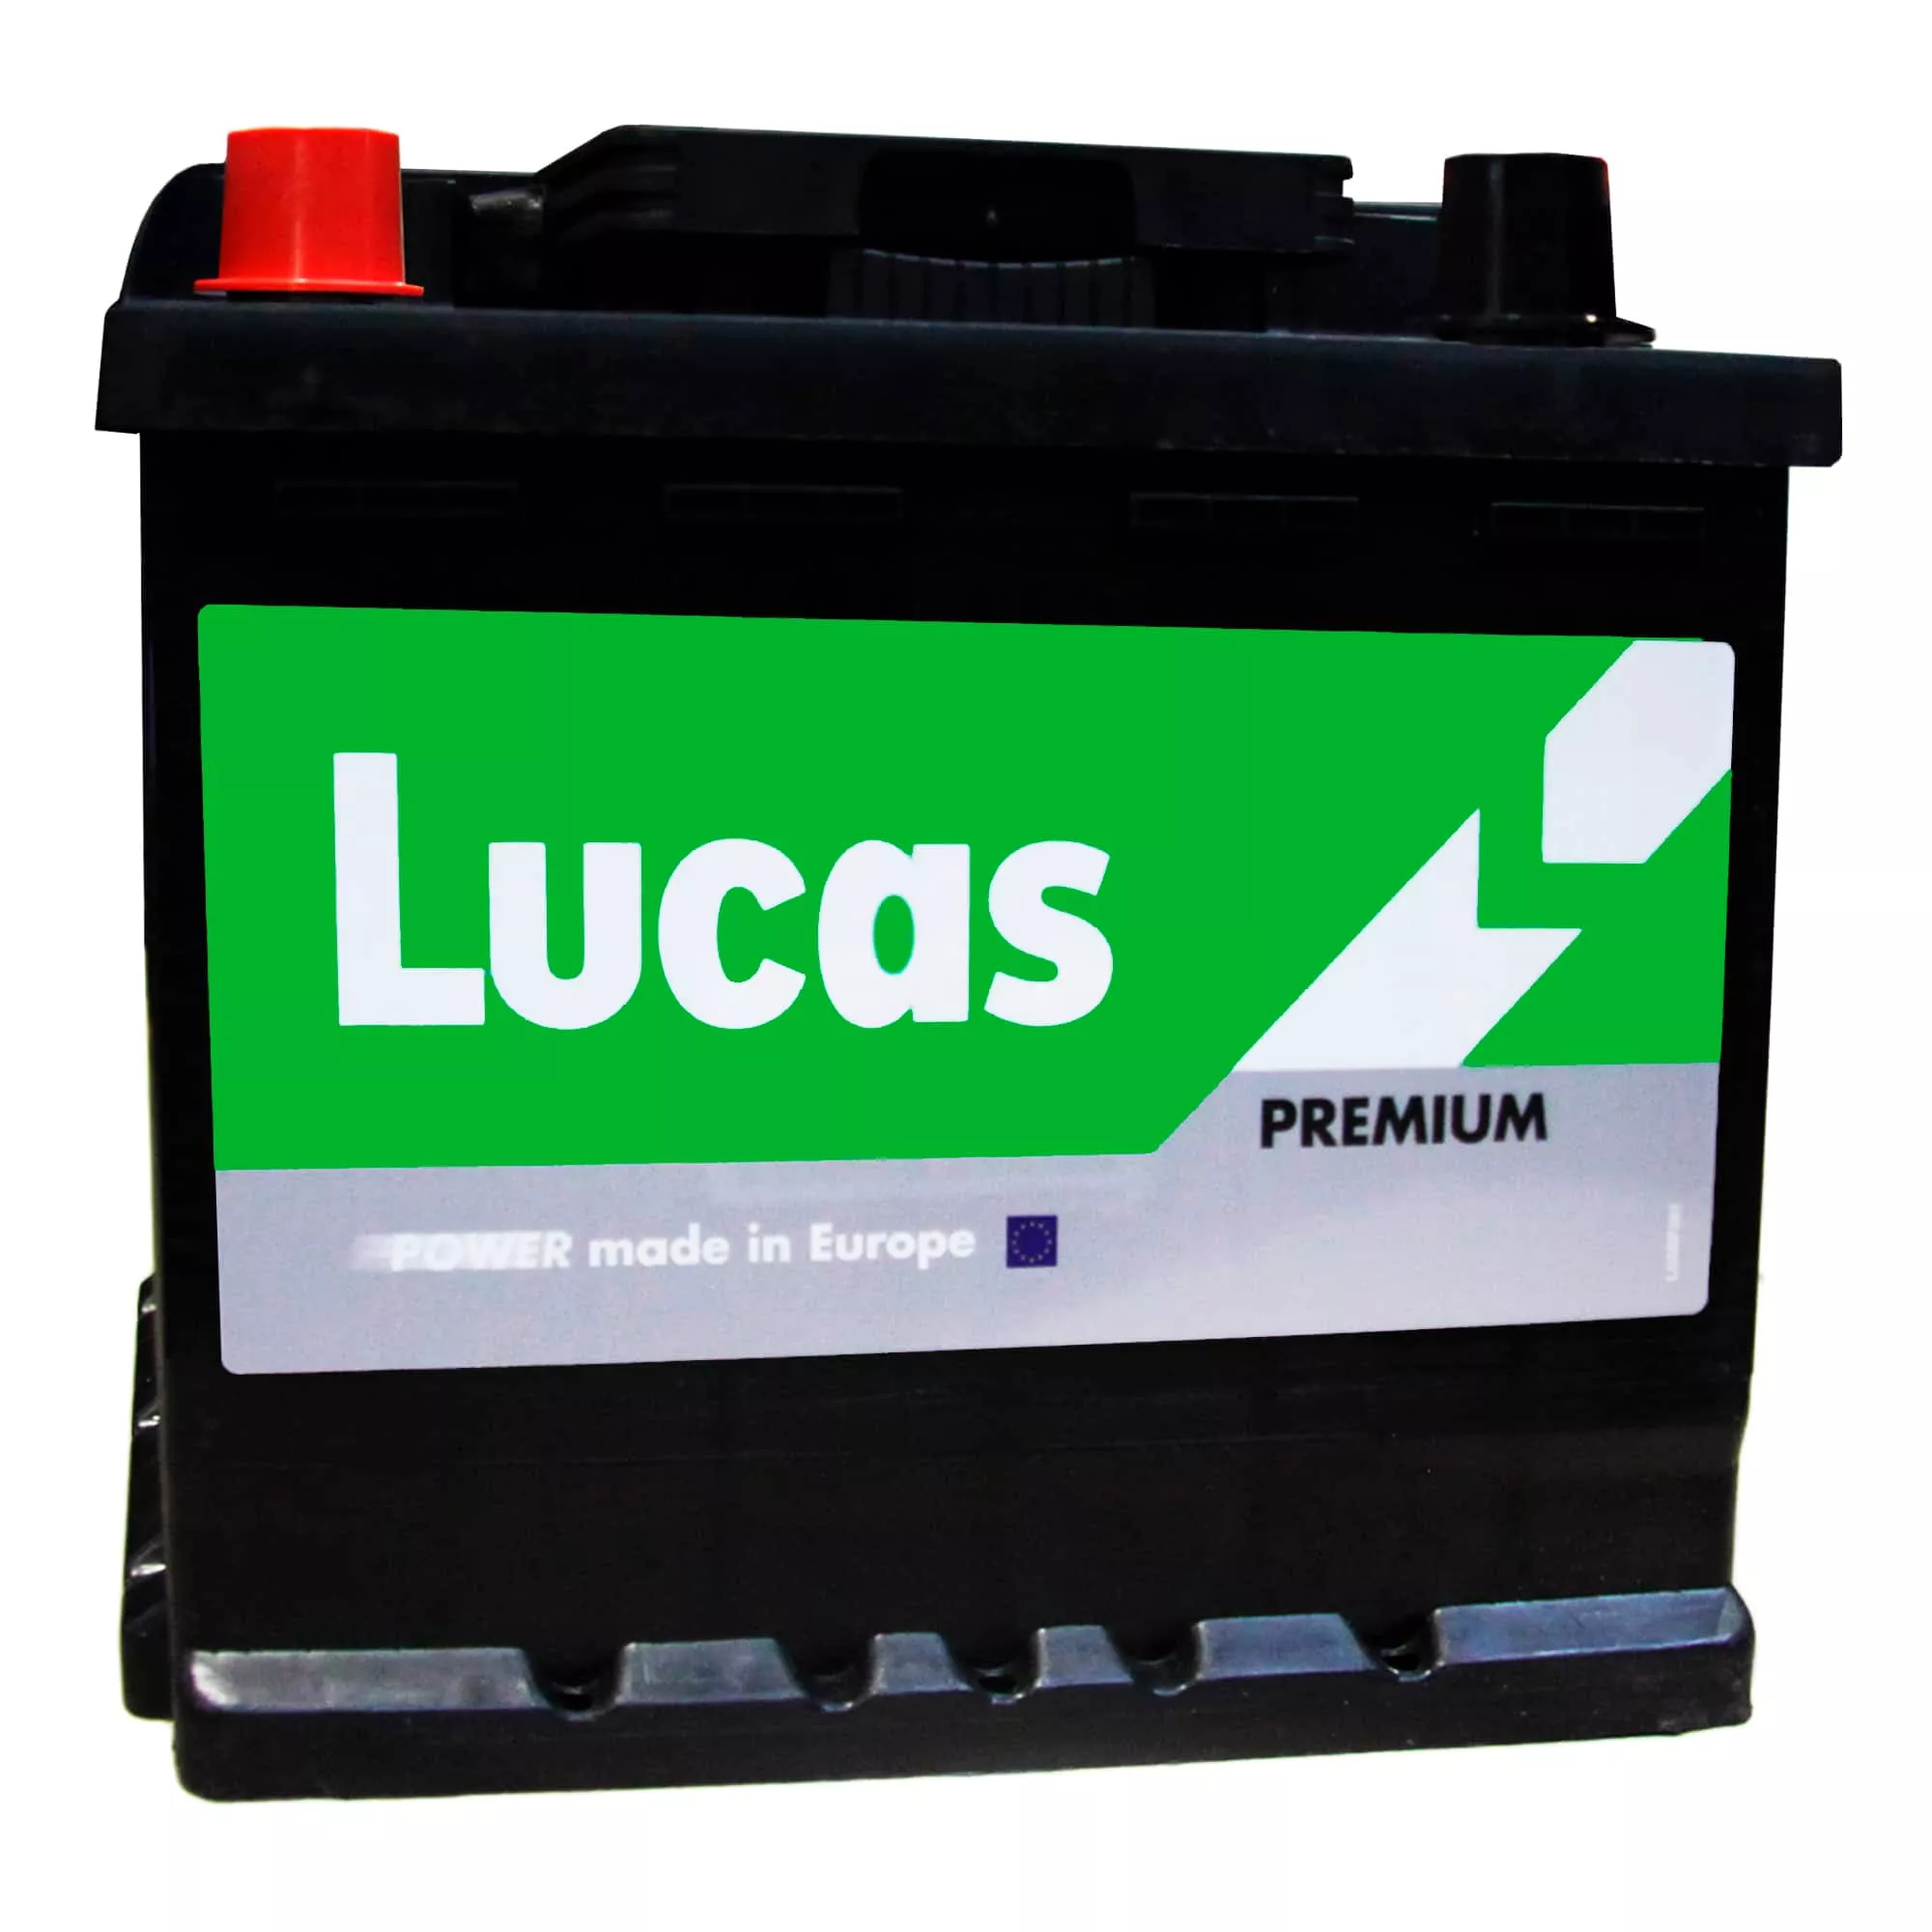 Аккумулятор Lucas (Batteries manufactured by Exide in Spain) 6CT-44 Аз (LBP009A)